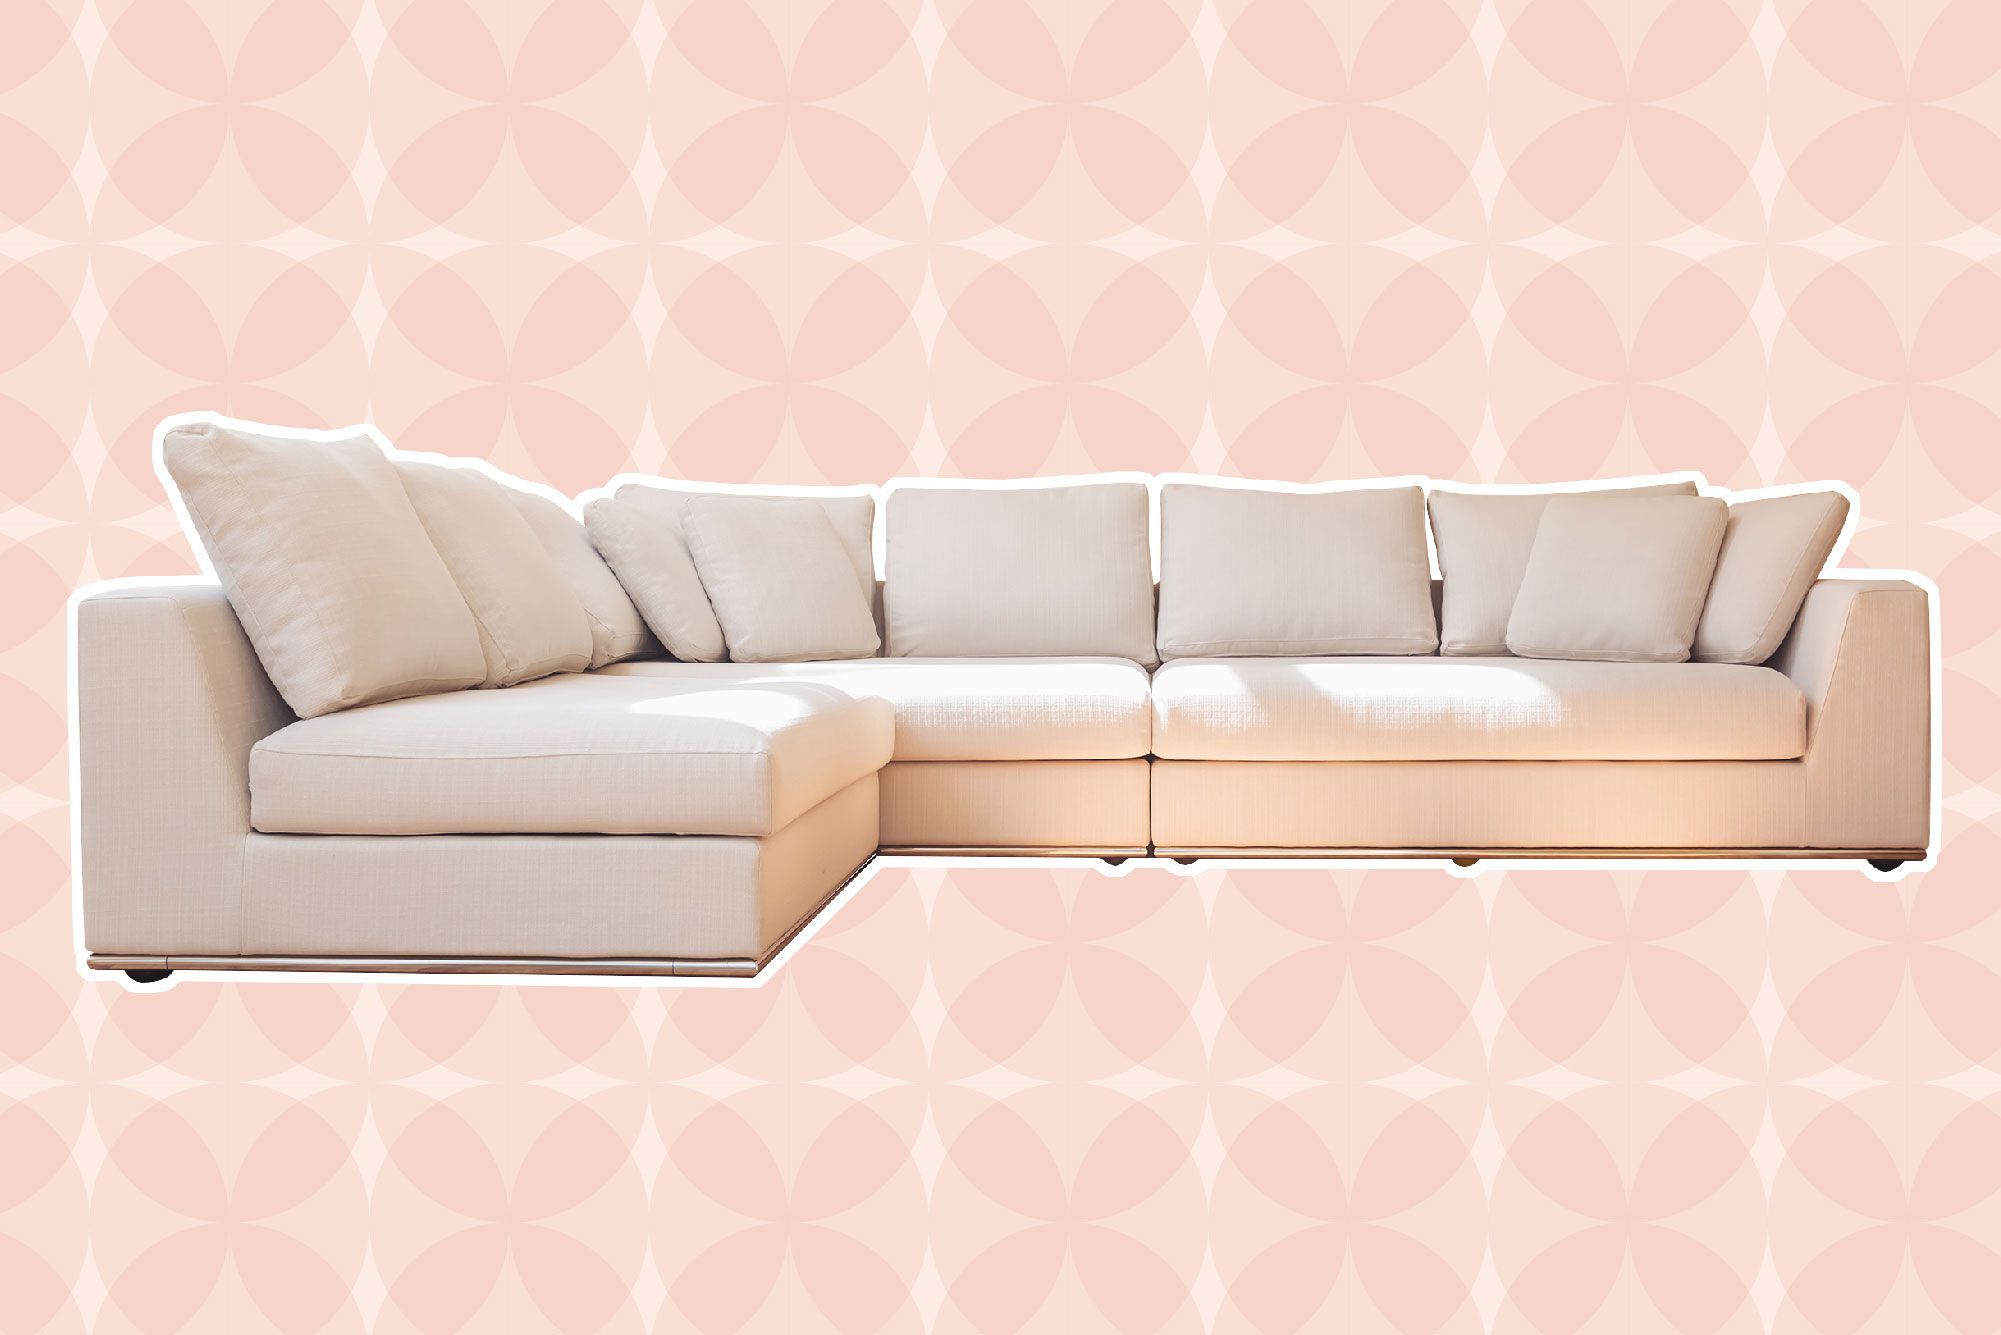 The 11 Best Sectional Sofas Of 2023, Testedus Regarding Heavy Duty Sectional Couches (View 4 of 20)